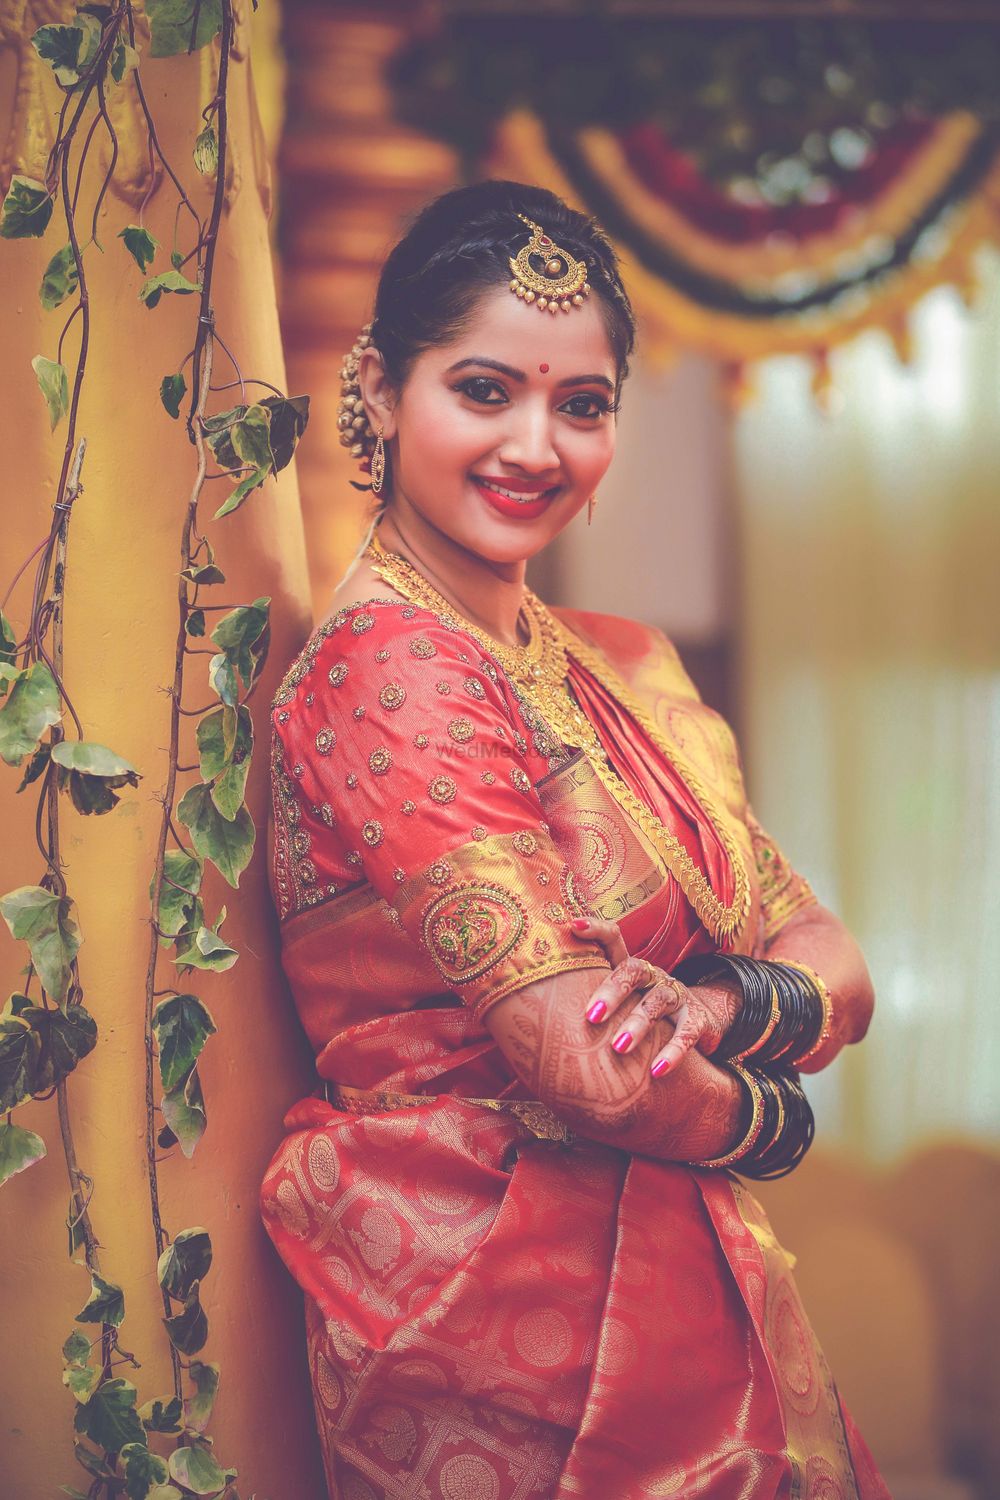 Photo From a Bangalore wedding story - By Dreamclicks